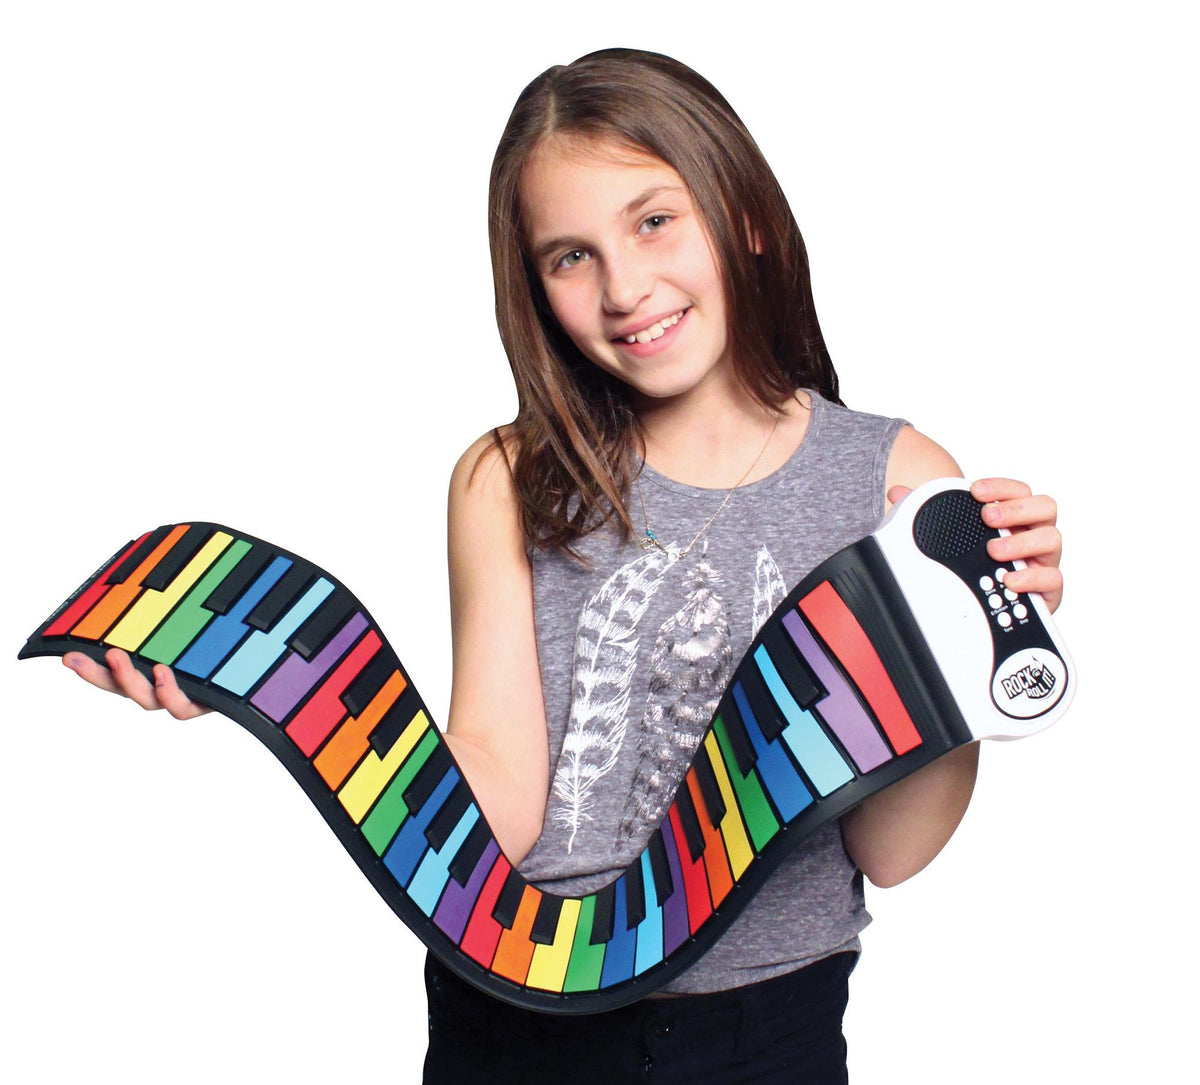 Rock and Roll It Rainbow Flexible Piano